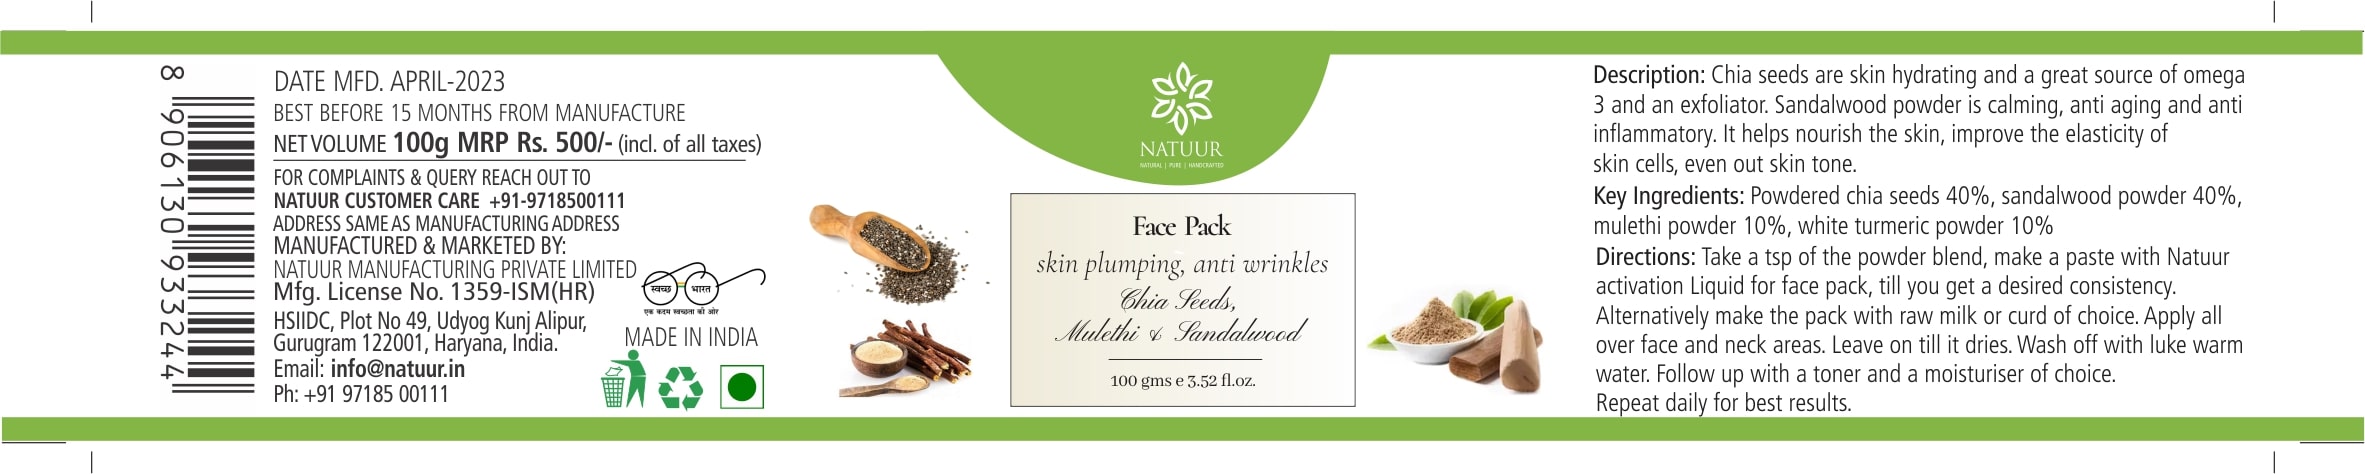 Natuur face pack - chia seeds, mulethi and sandalwood - skin plumping - Natuur.in